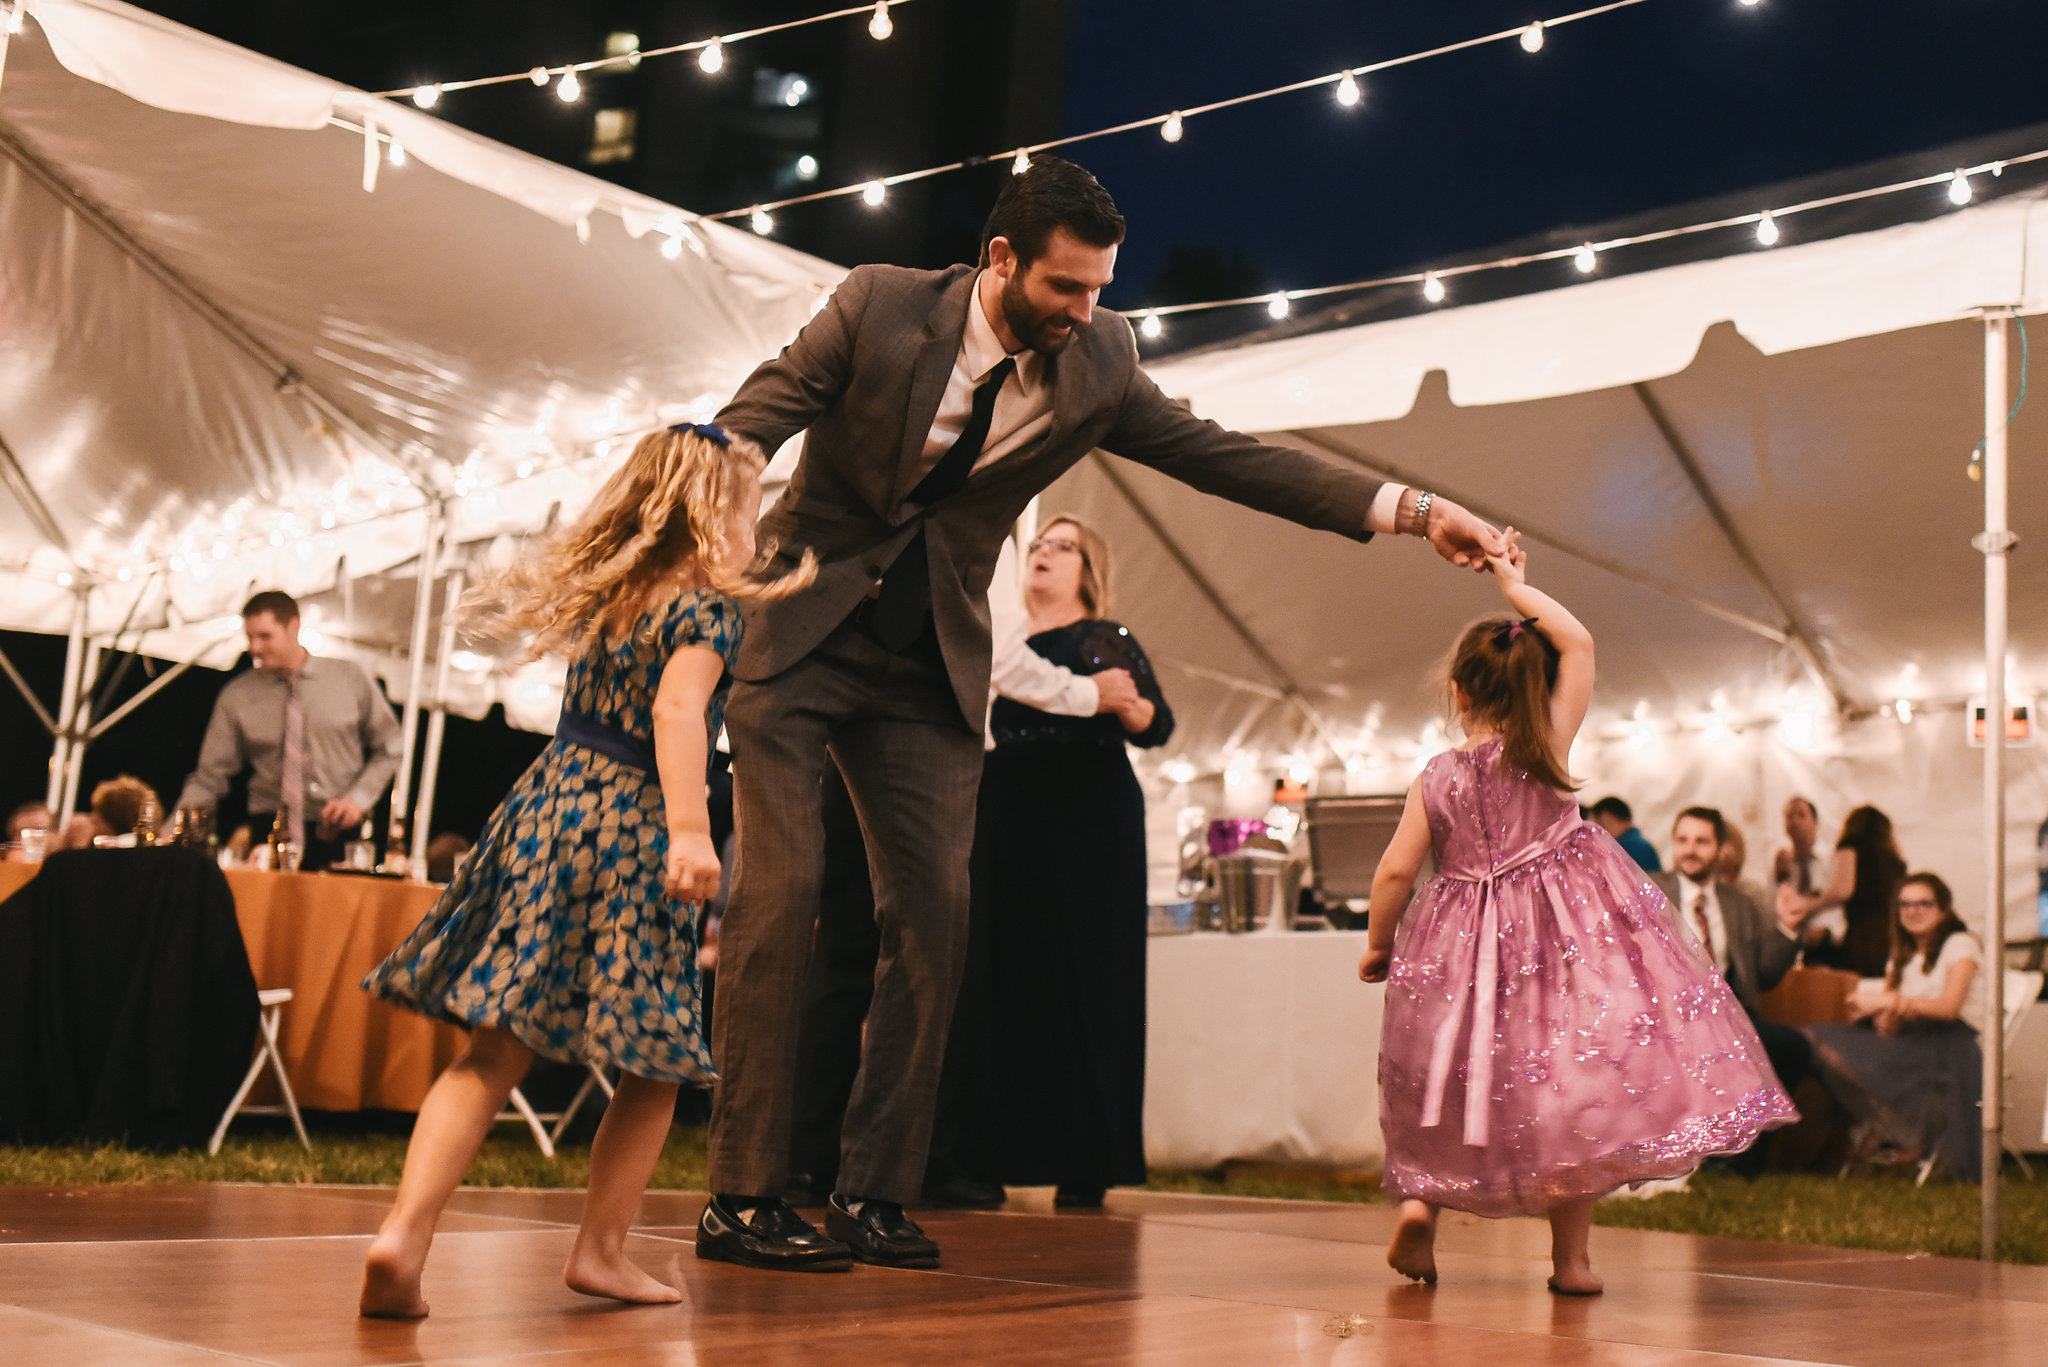  Baltimore, Canton, Modern, Outdoor Reception, Maryland Wedding Photographer, Romantic, Classic, Boston Street Pier Park, Guest dancing with little girls at reception 